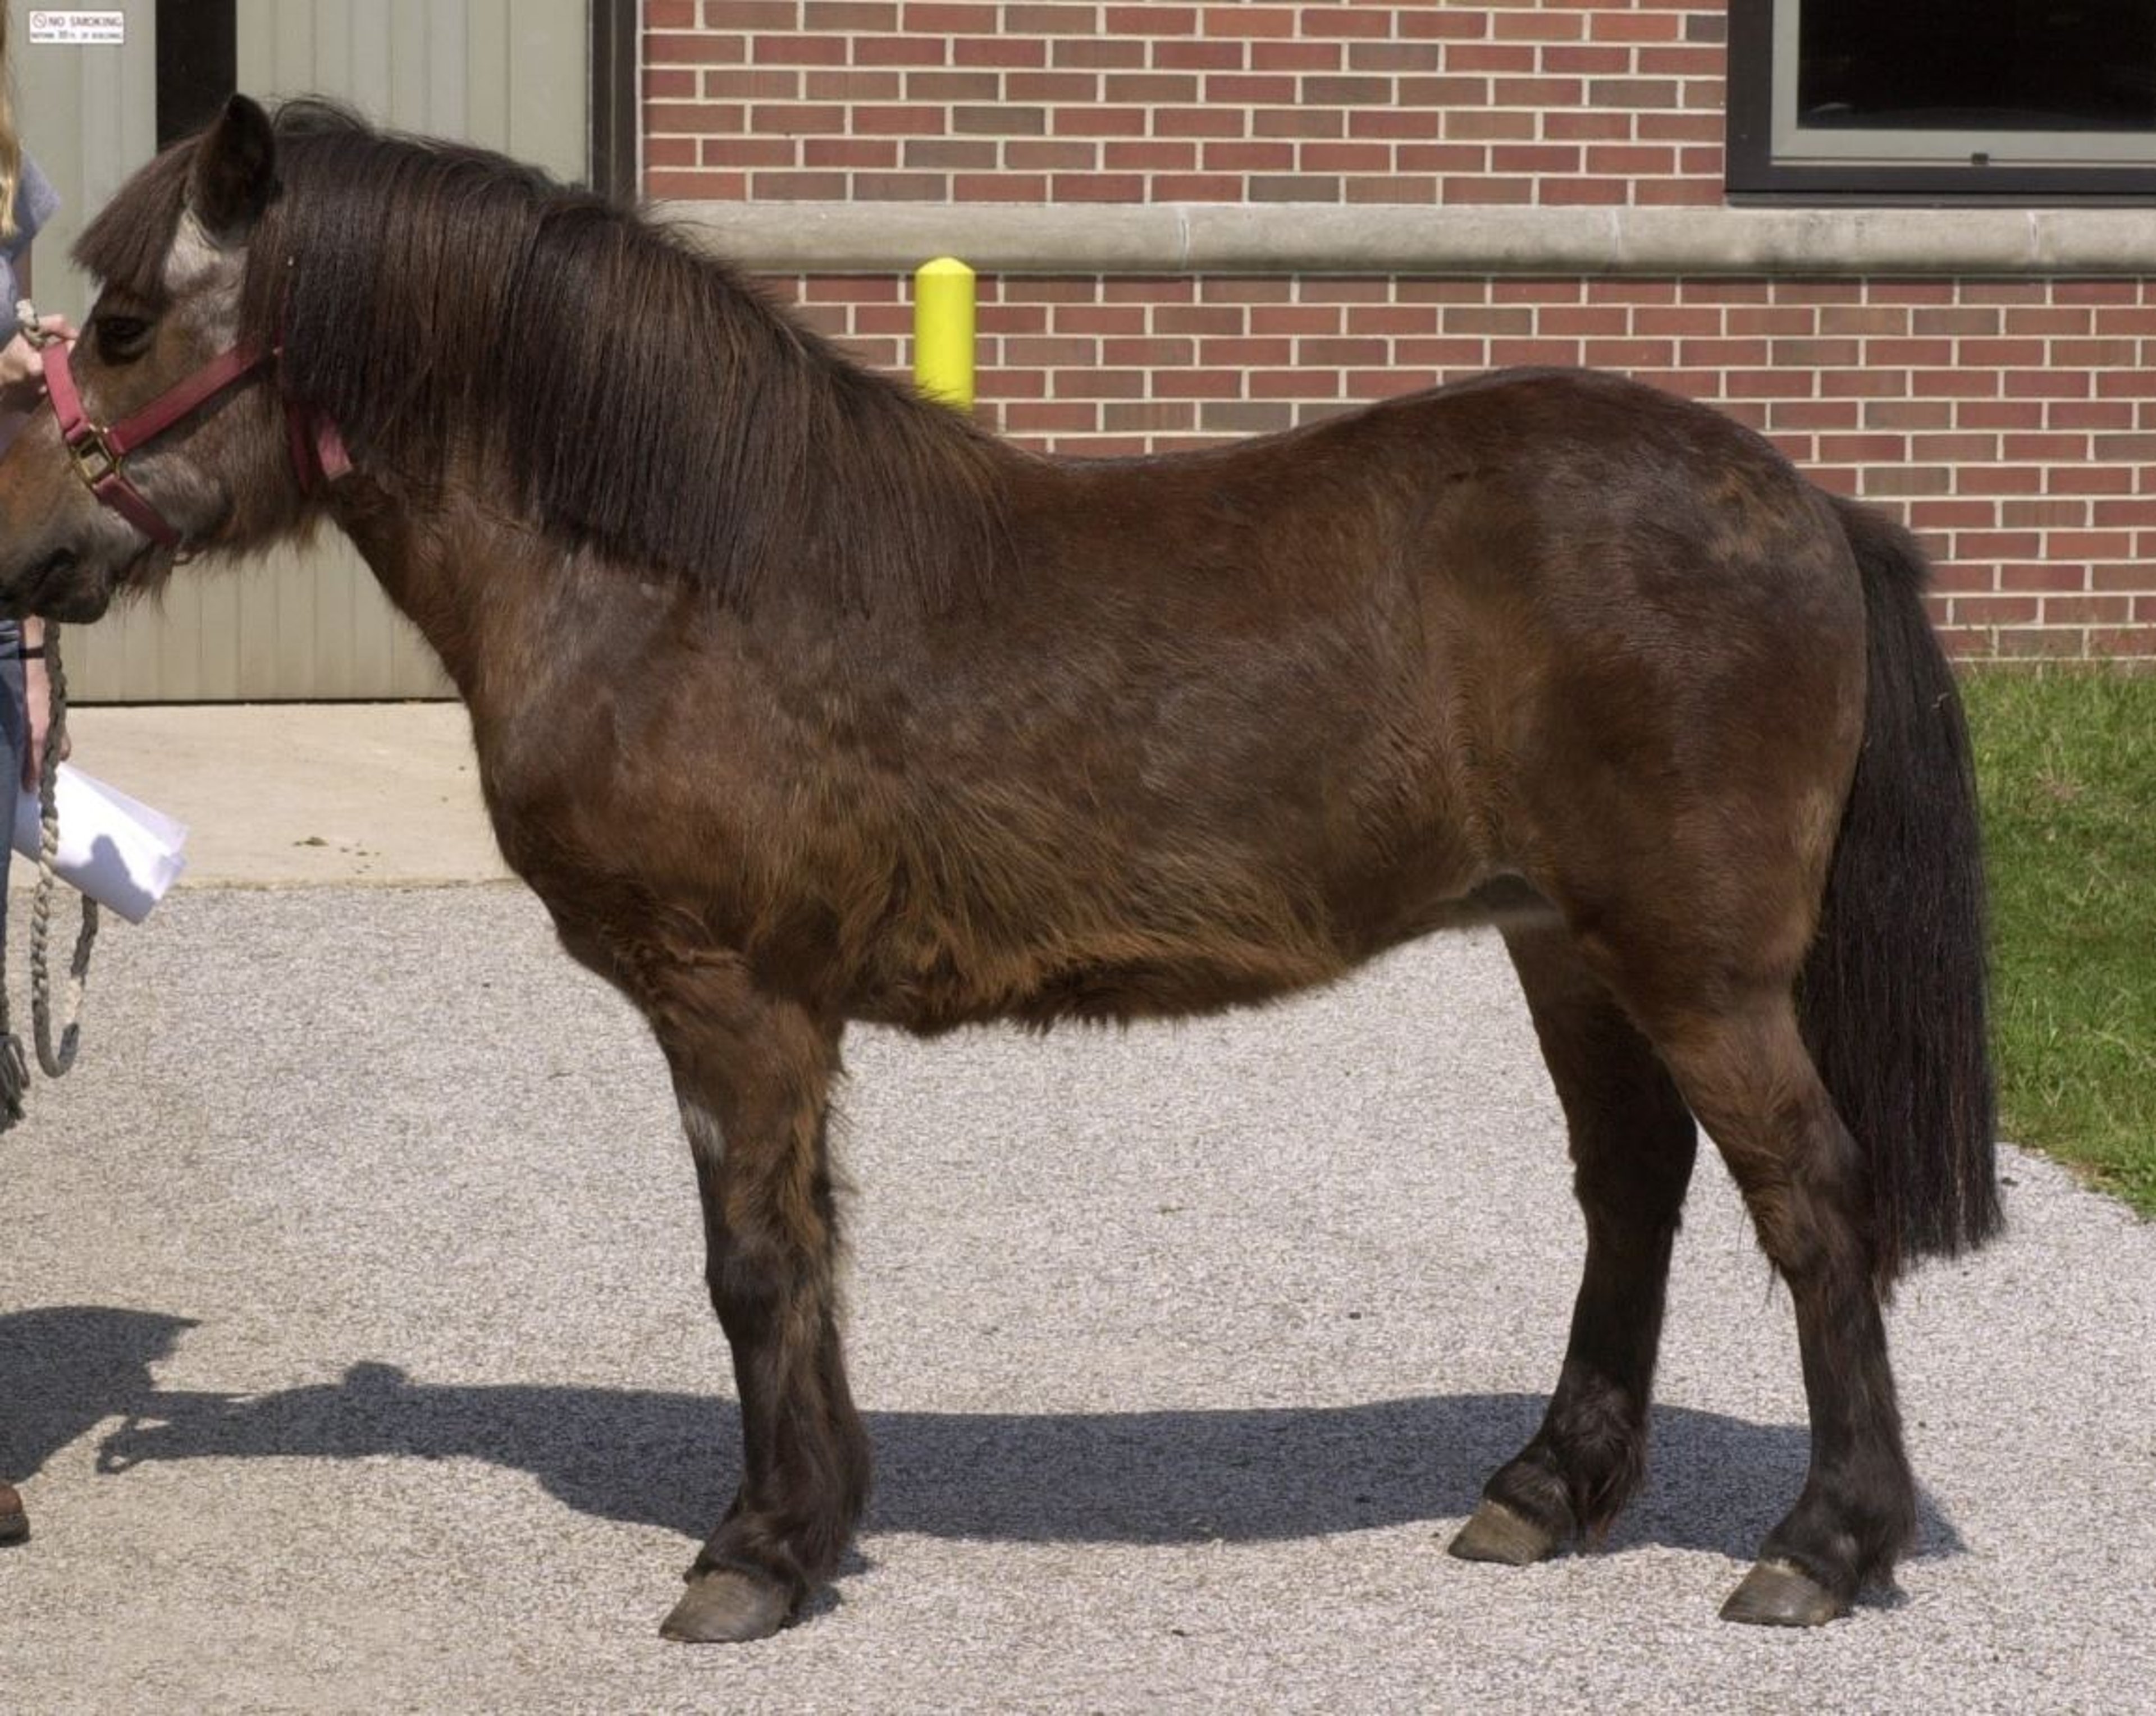 Pony with equine metabolic syndrome and pituitary pars intermedia dysfunction